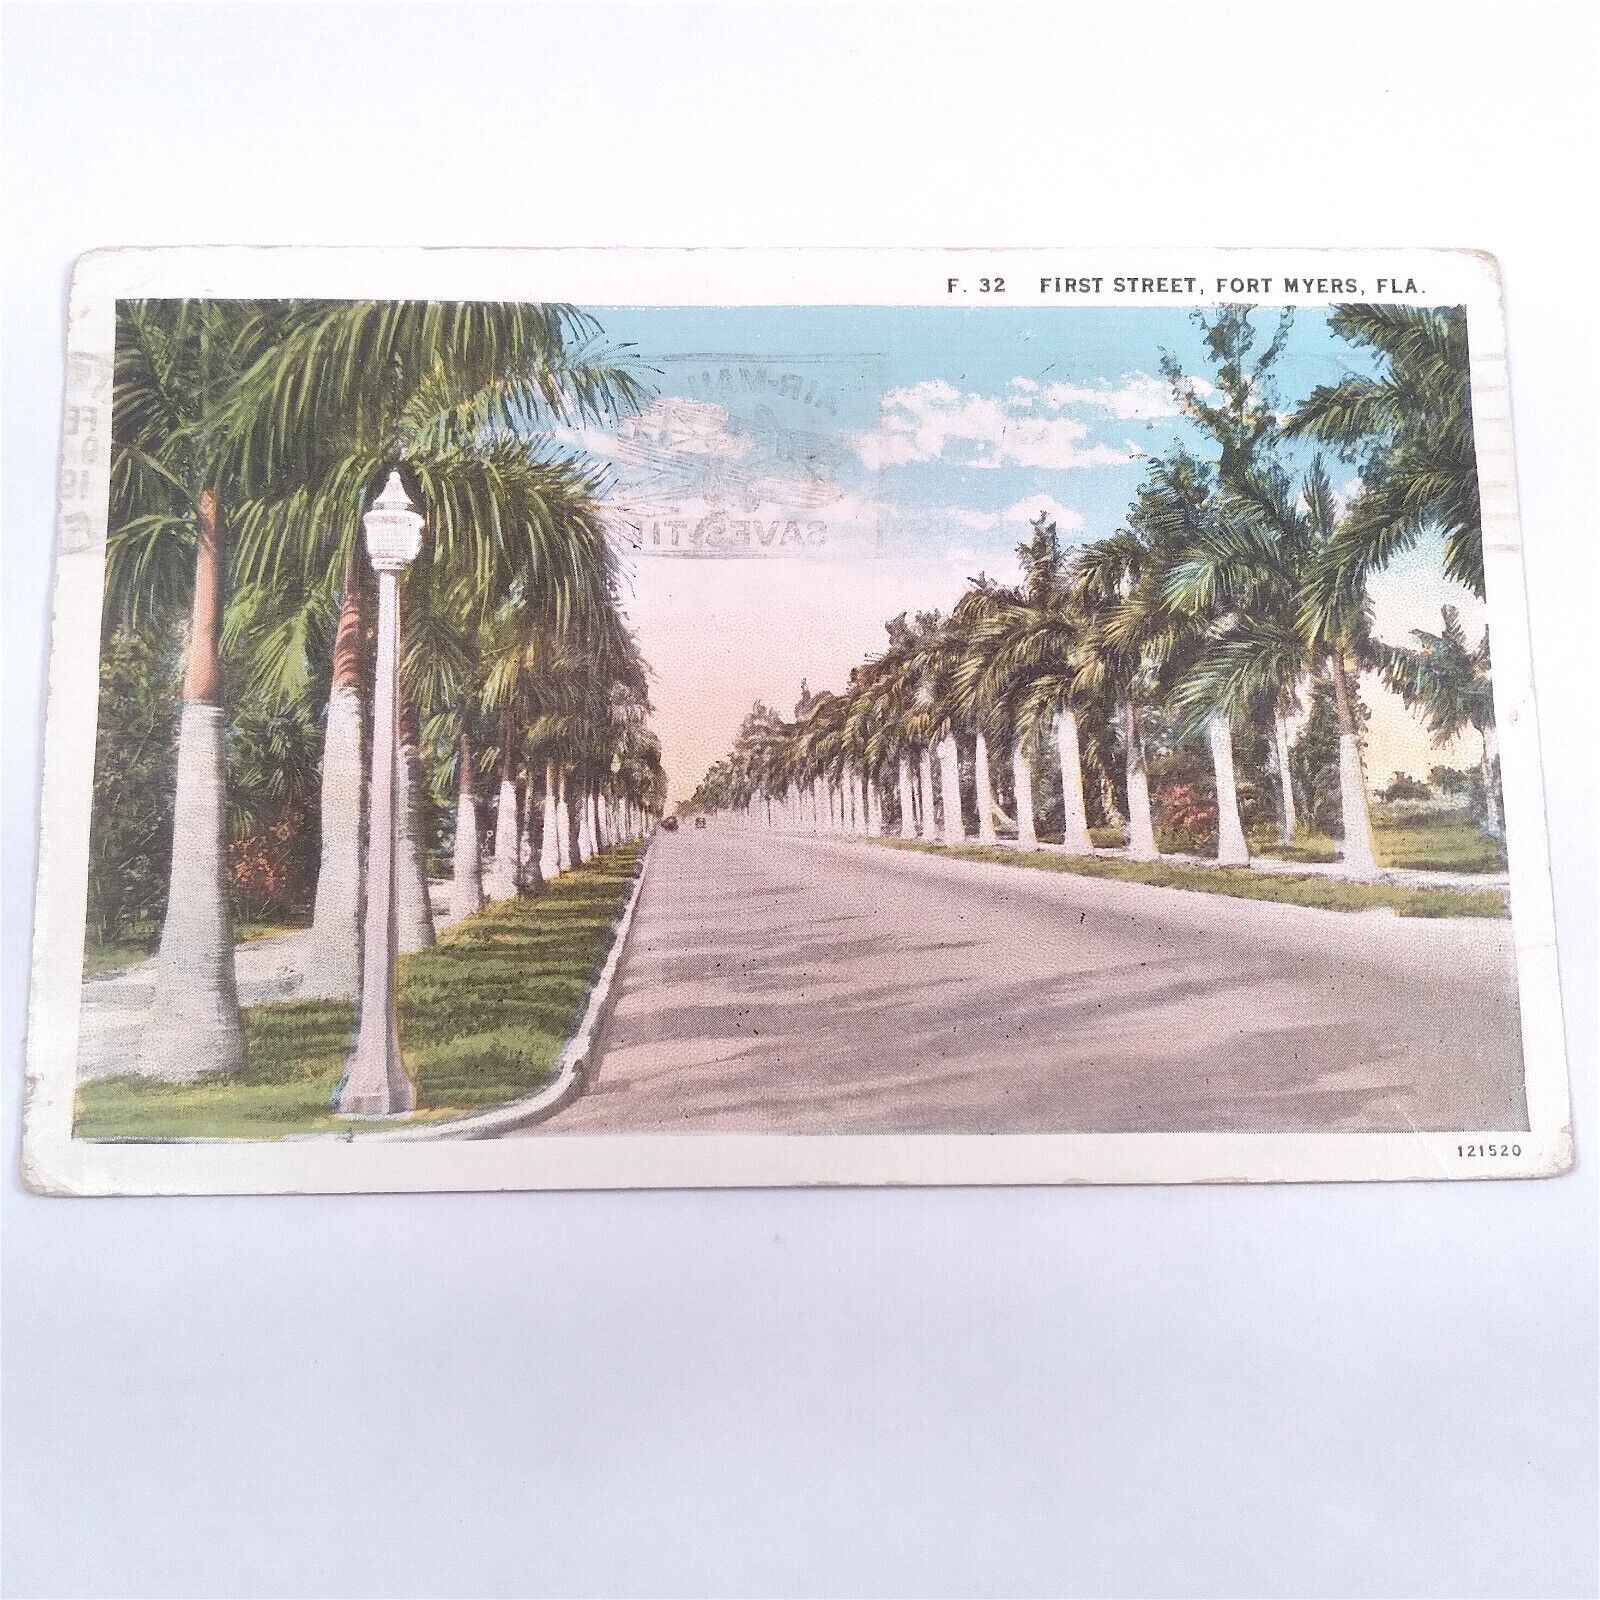 Fort Myers Florida -First Street- Palm Trees Panoramic View Postcard c1908-13